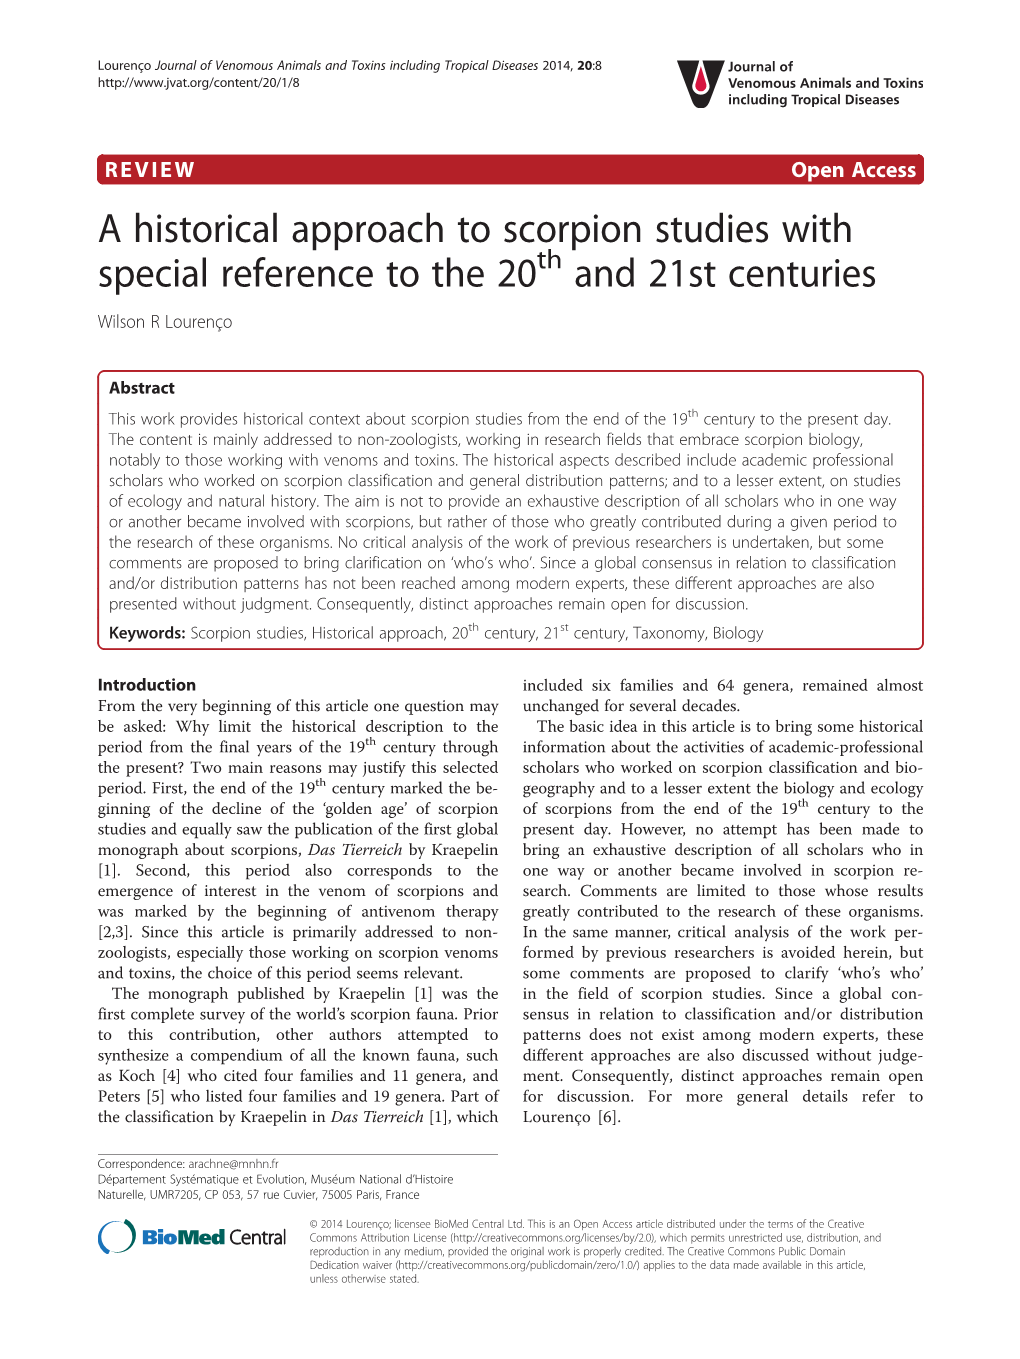 A Historical Approach to Scorpion Studies with Special Reference to the 20Th and 21St Centuries Wilson R Lourenço